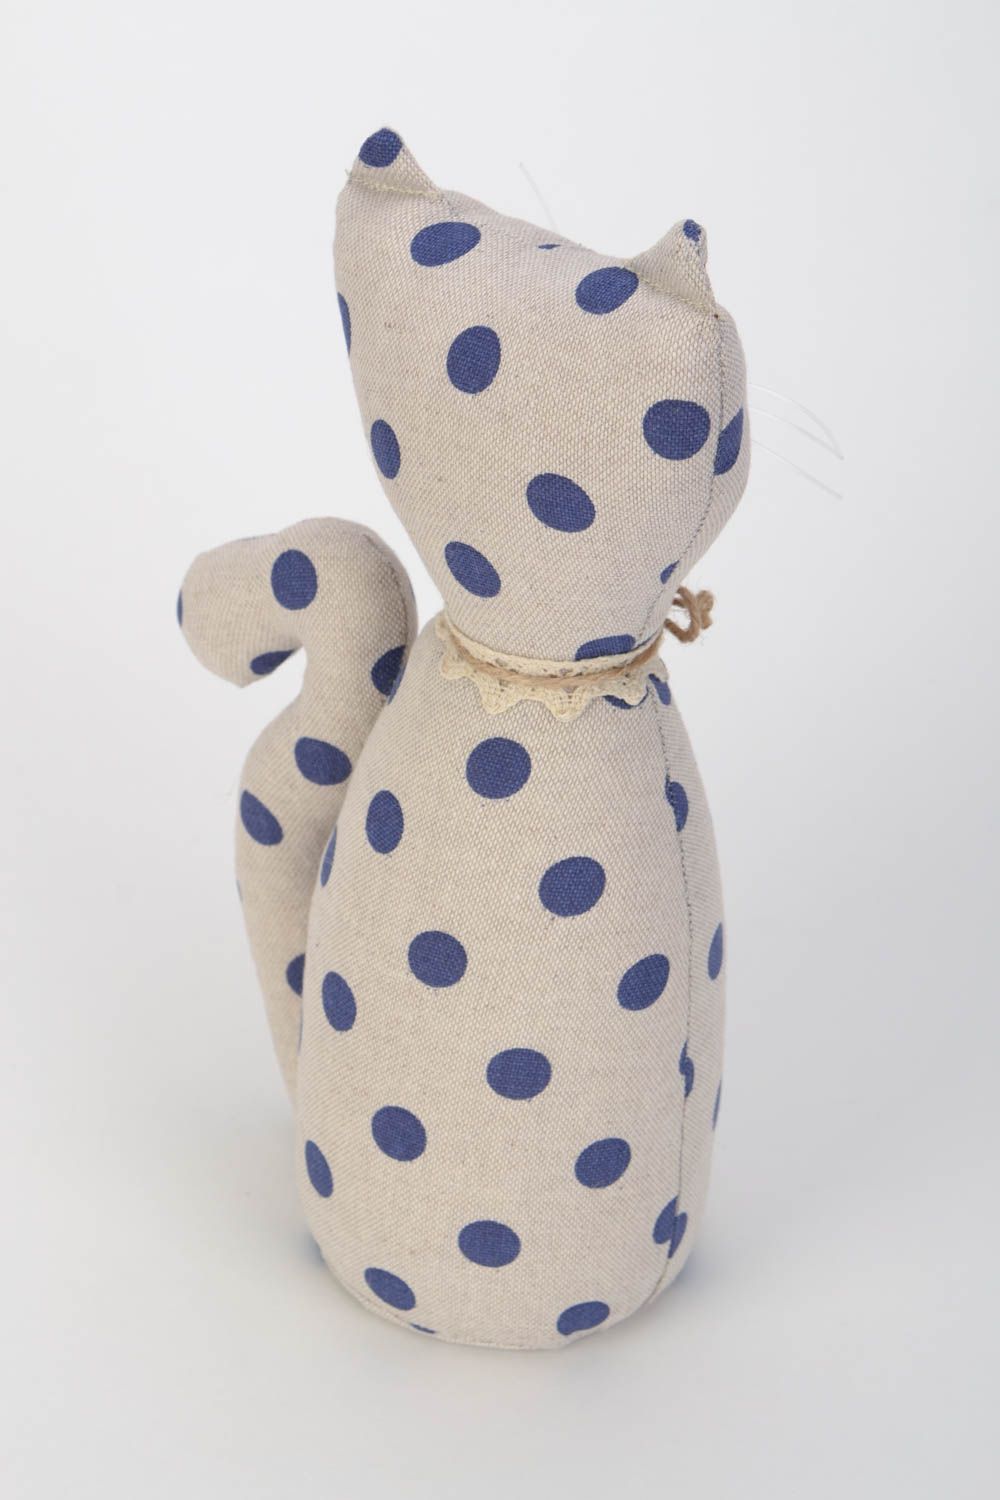 Handmade soft toy sewn of light blue polka dot fabric in the shape of cat photo 5